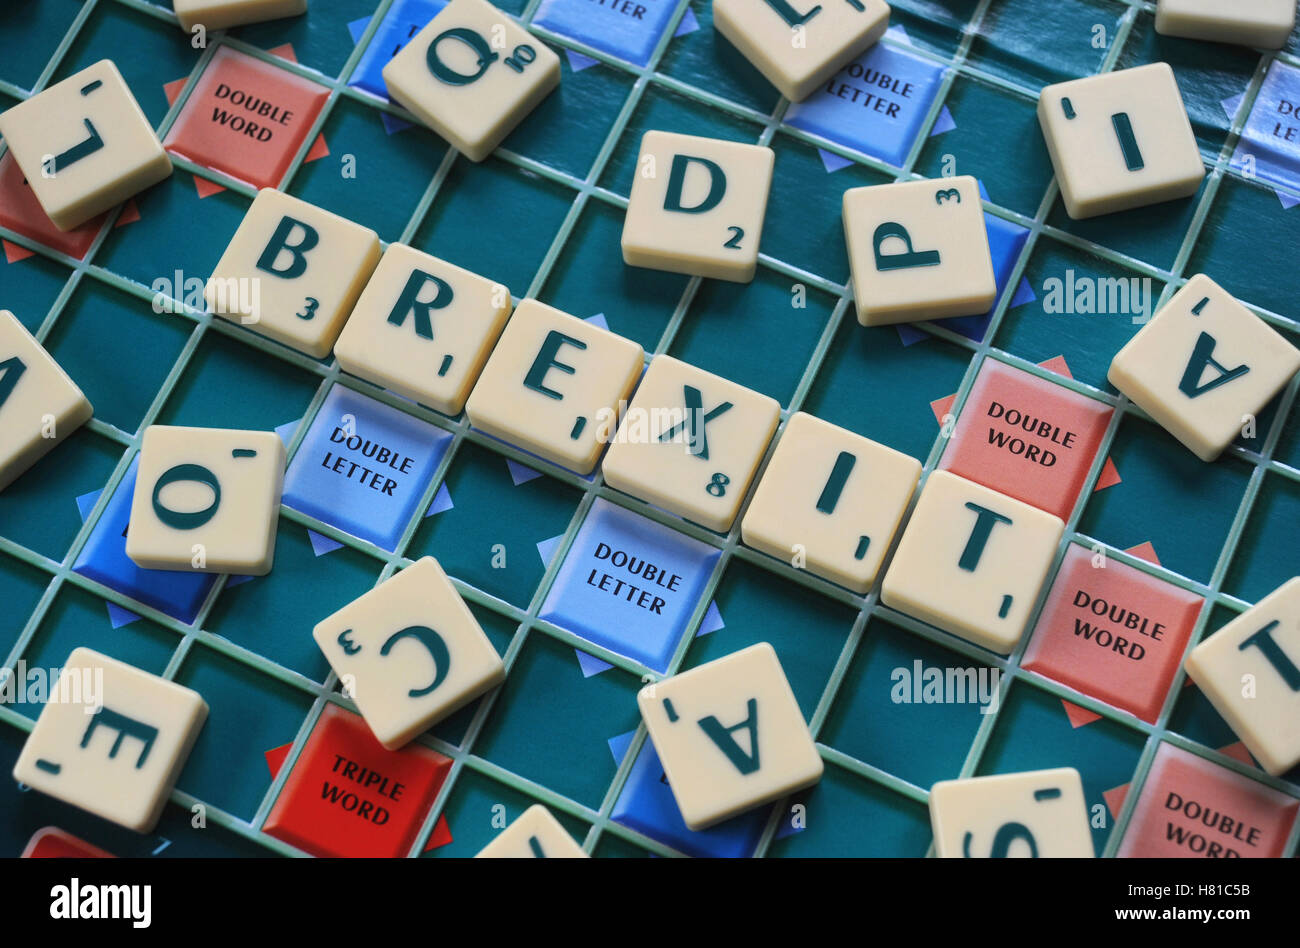 SCRABBLE WORD GAME LETTERS SPELLING 'BREXIT' RE BREXIT LEAVING THE EUROPEAN UNION REFERENDUM VOTE VOTING INVOKE ARTICLE 5O UK Stock Photo